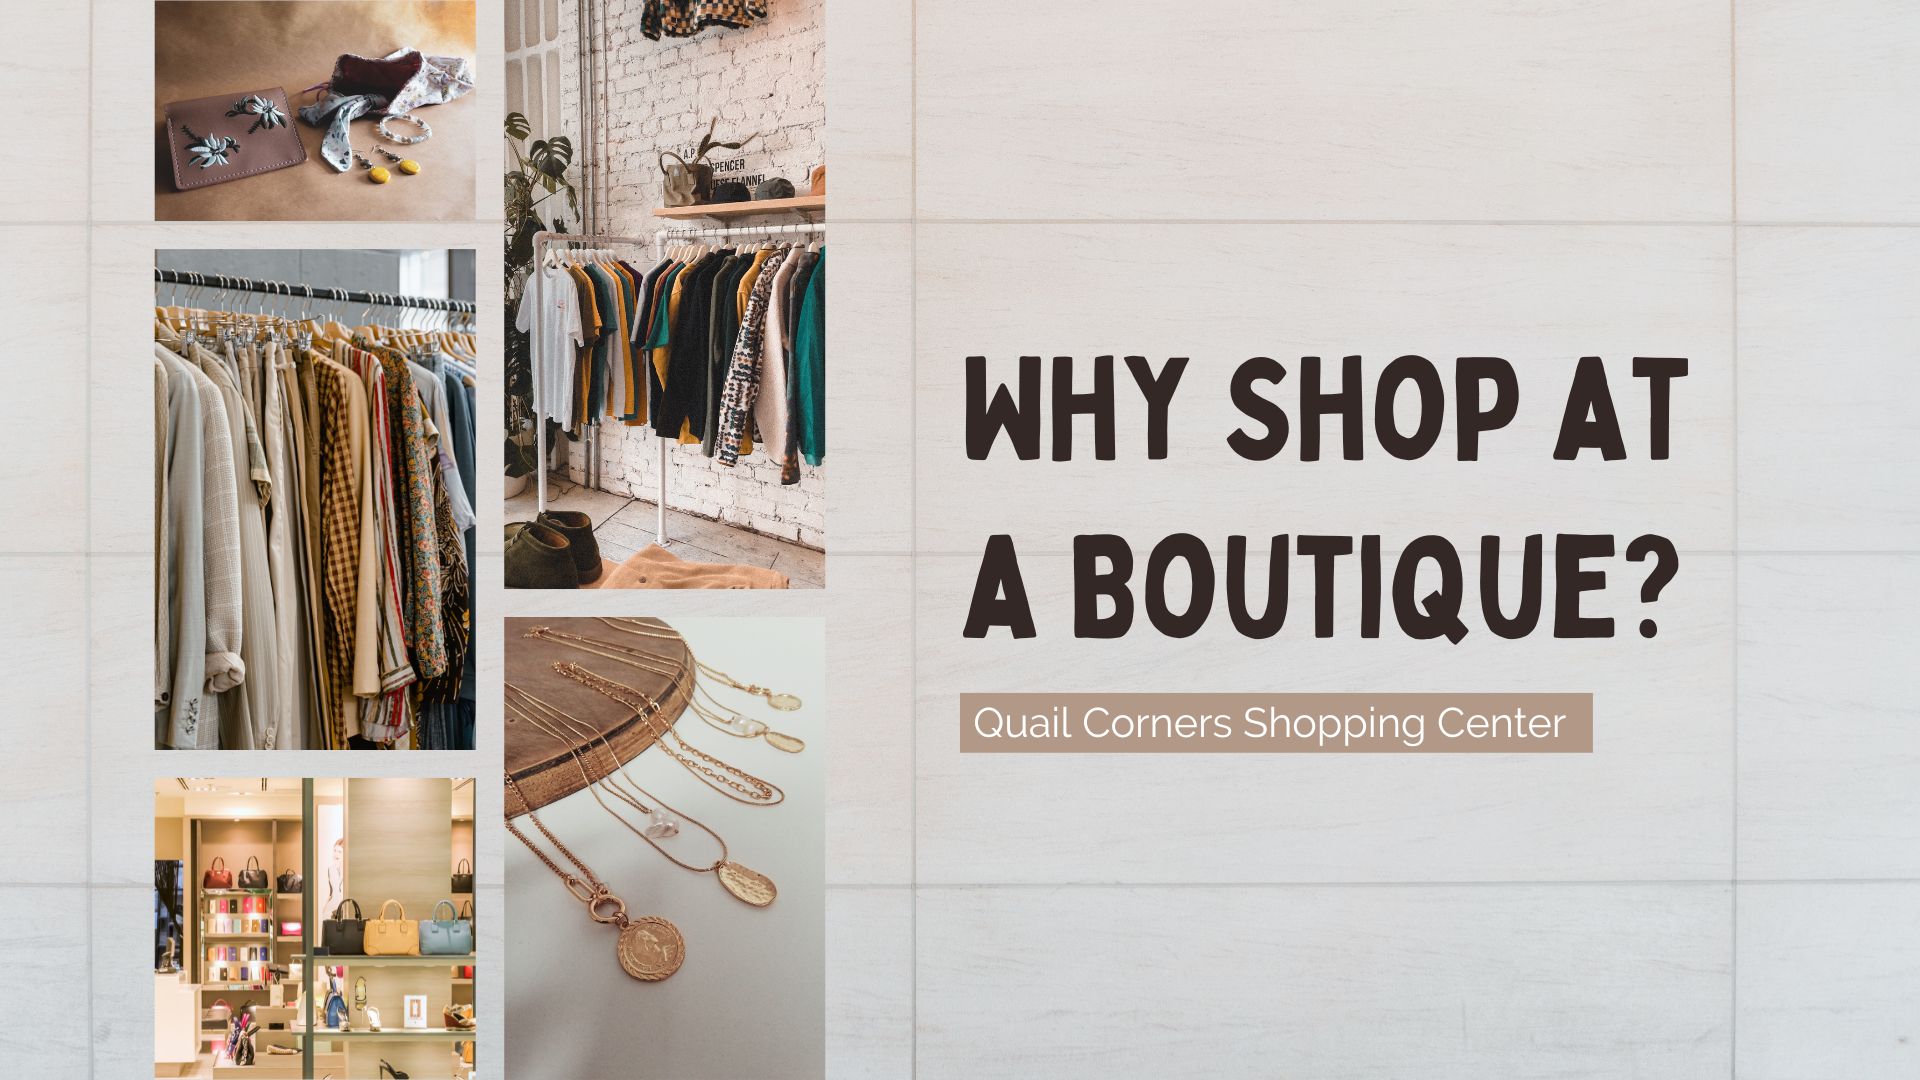 Why Shop at a Boutique?